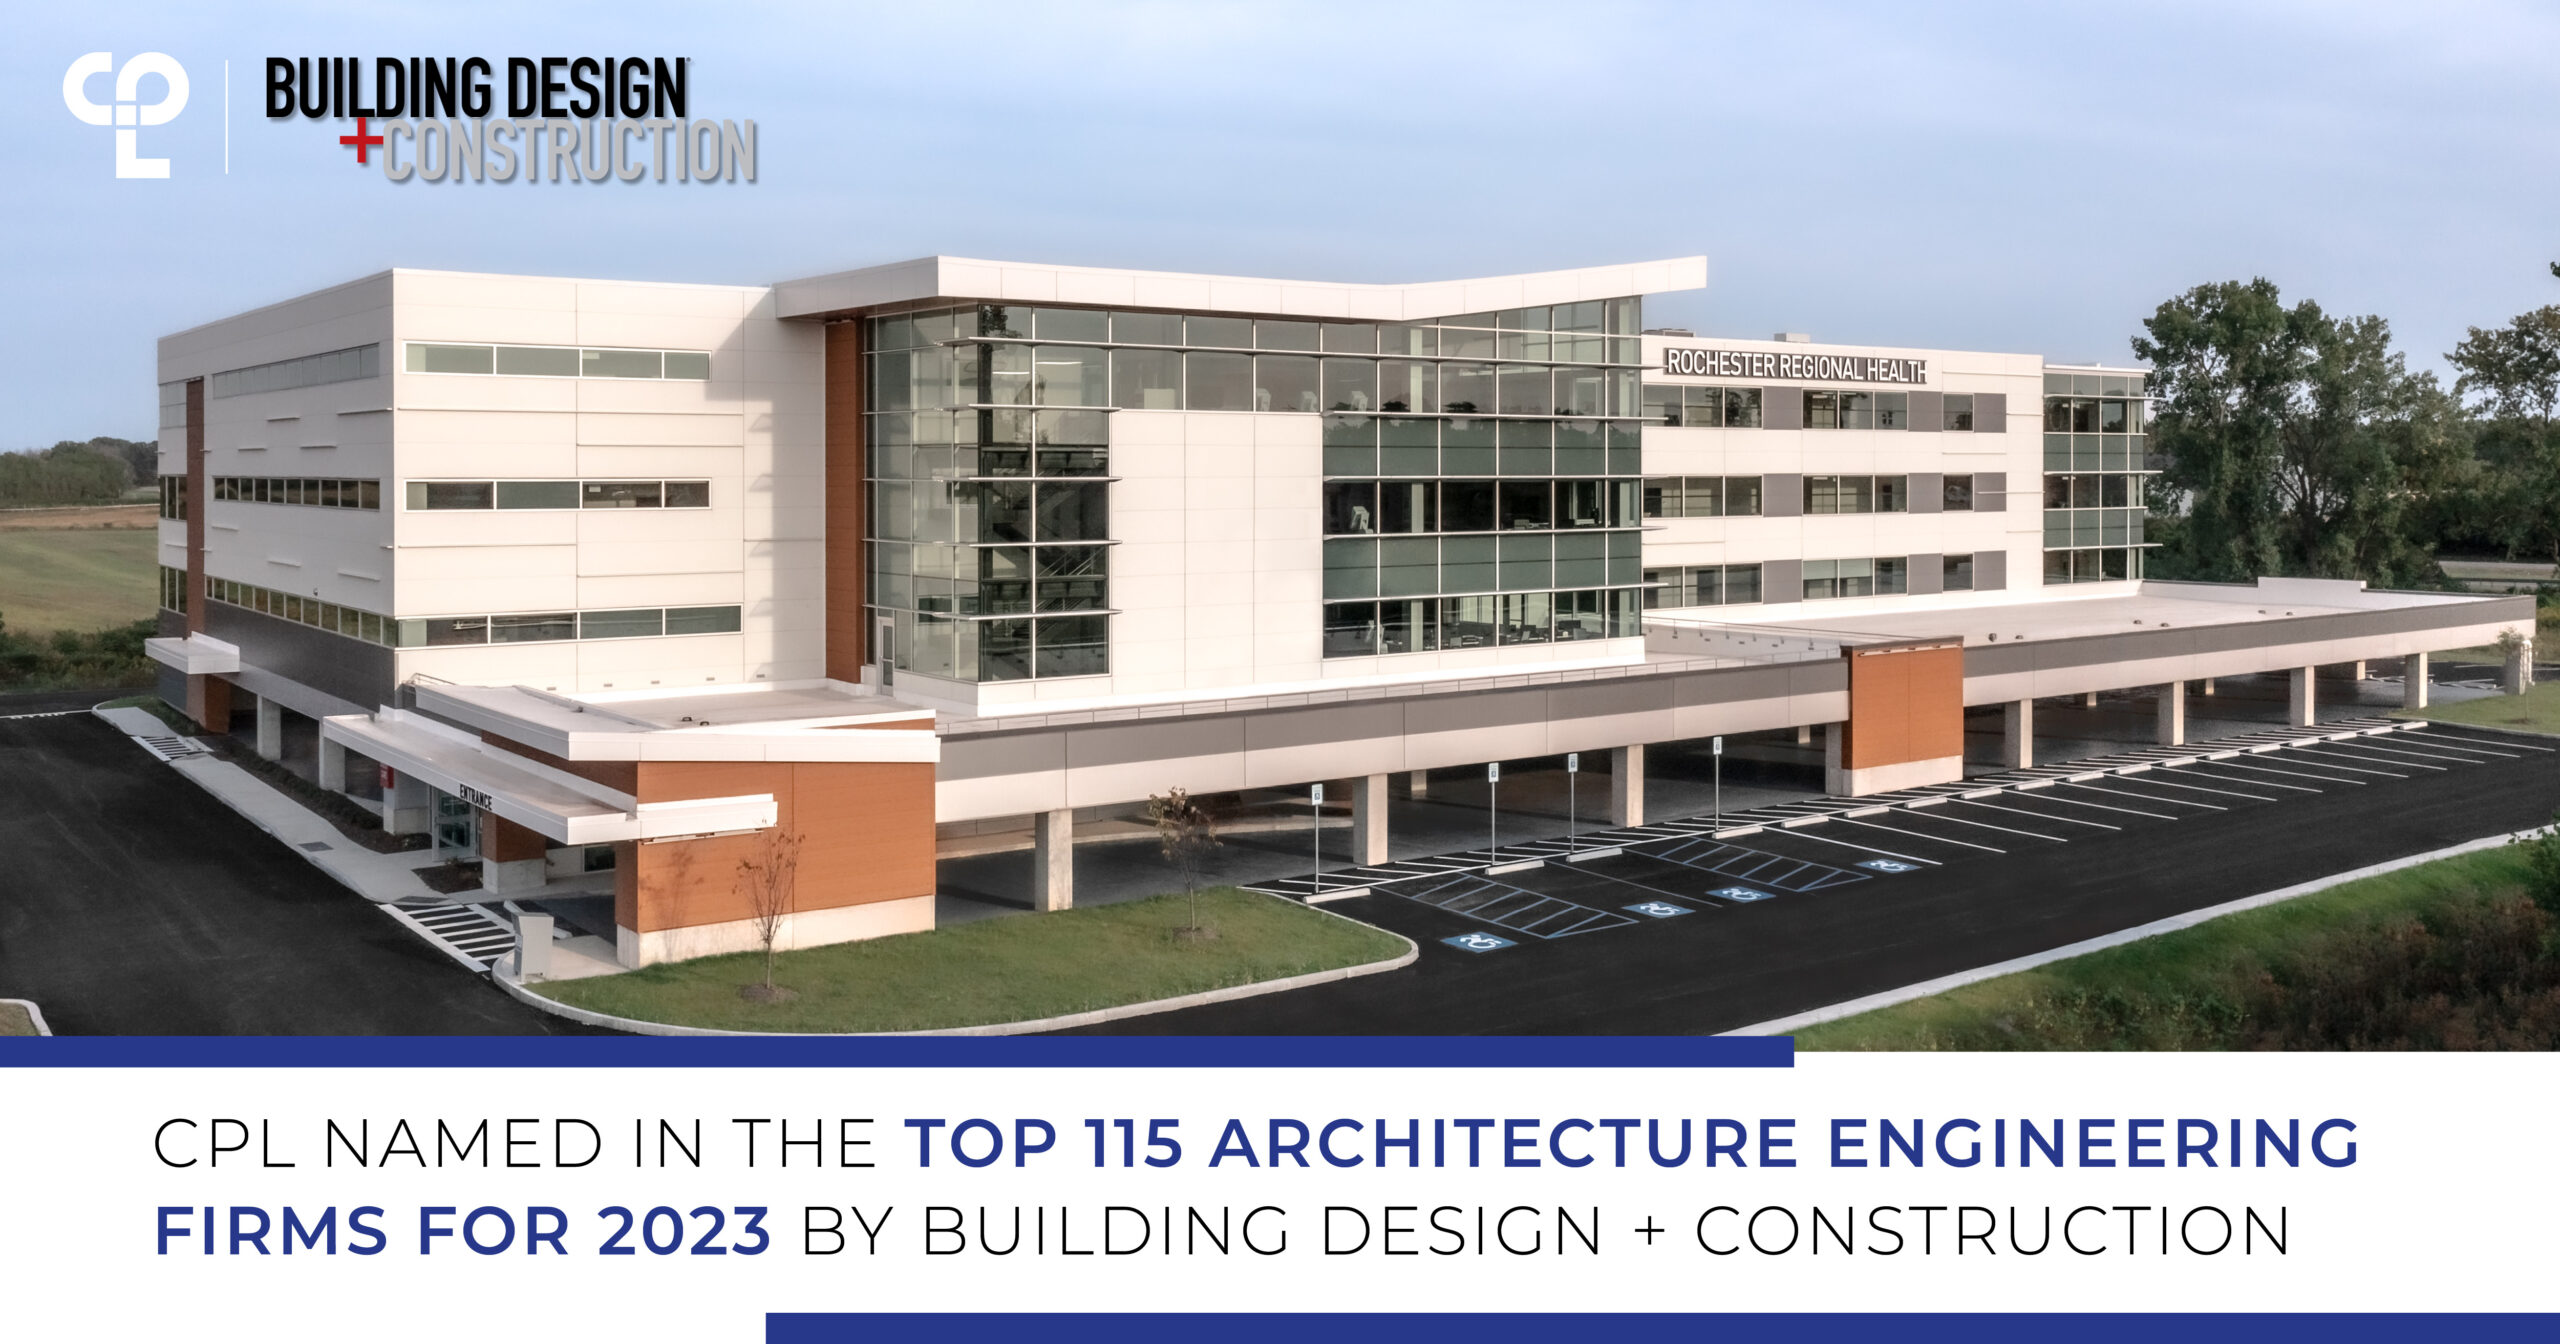 A graphic with an image of Rochester Regional Hospital in the background. In the top left is the CPL logo and Building Design + Construction's logo. At the bottom of the graphic is a white box with text that reads "CPL NAMED IN THE TOP 115 ARCHITECTURE ENGINEERING FIRMS FOR 2023 BY BUILDING DESIGN + CONSTRUCTION"